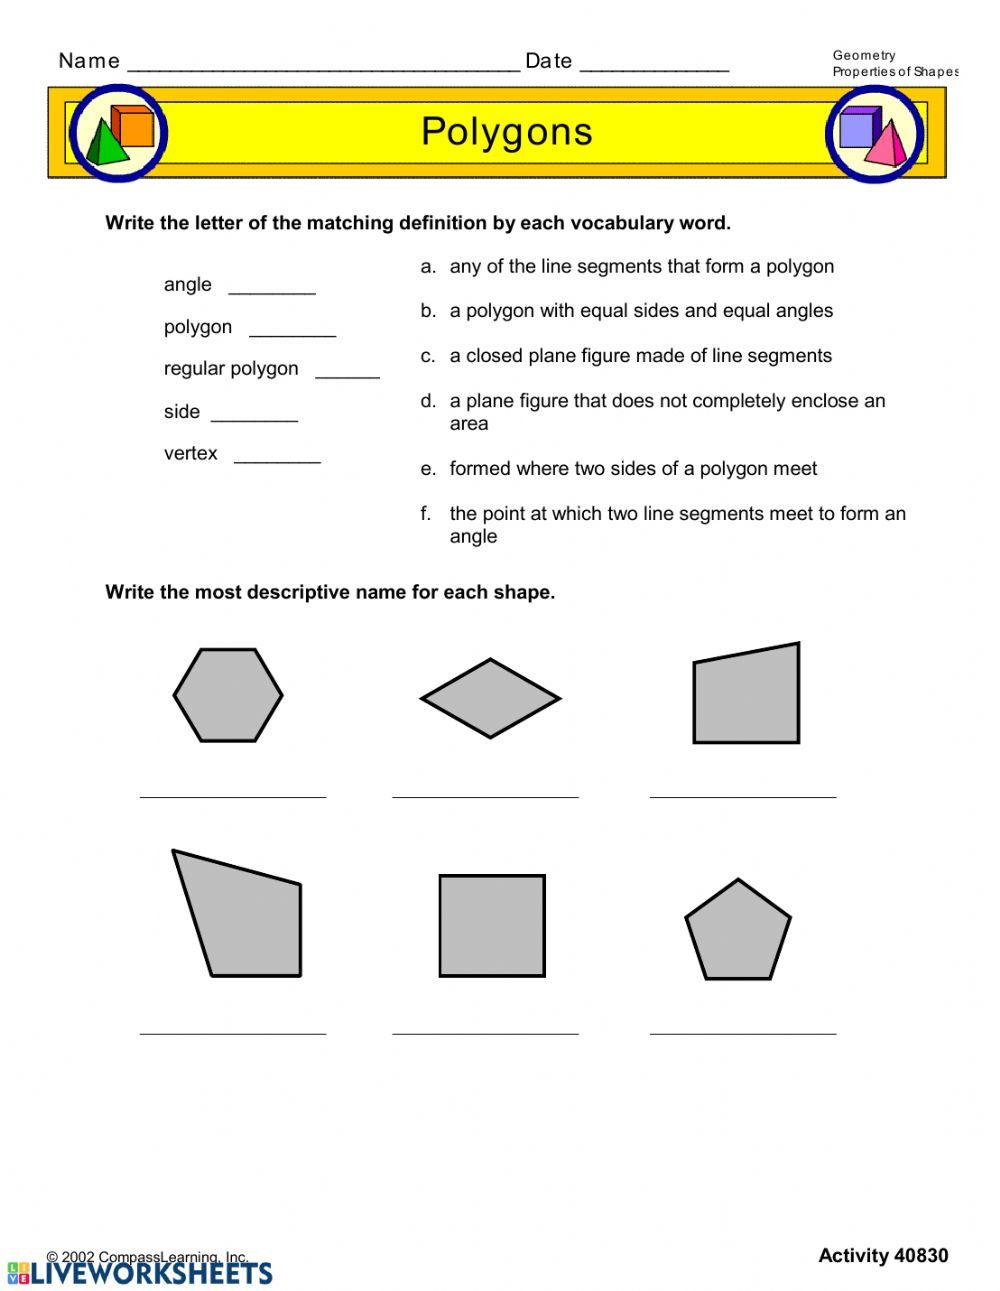 Attributes of Polygons